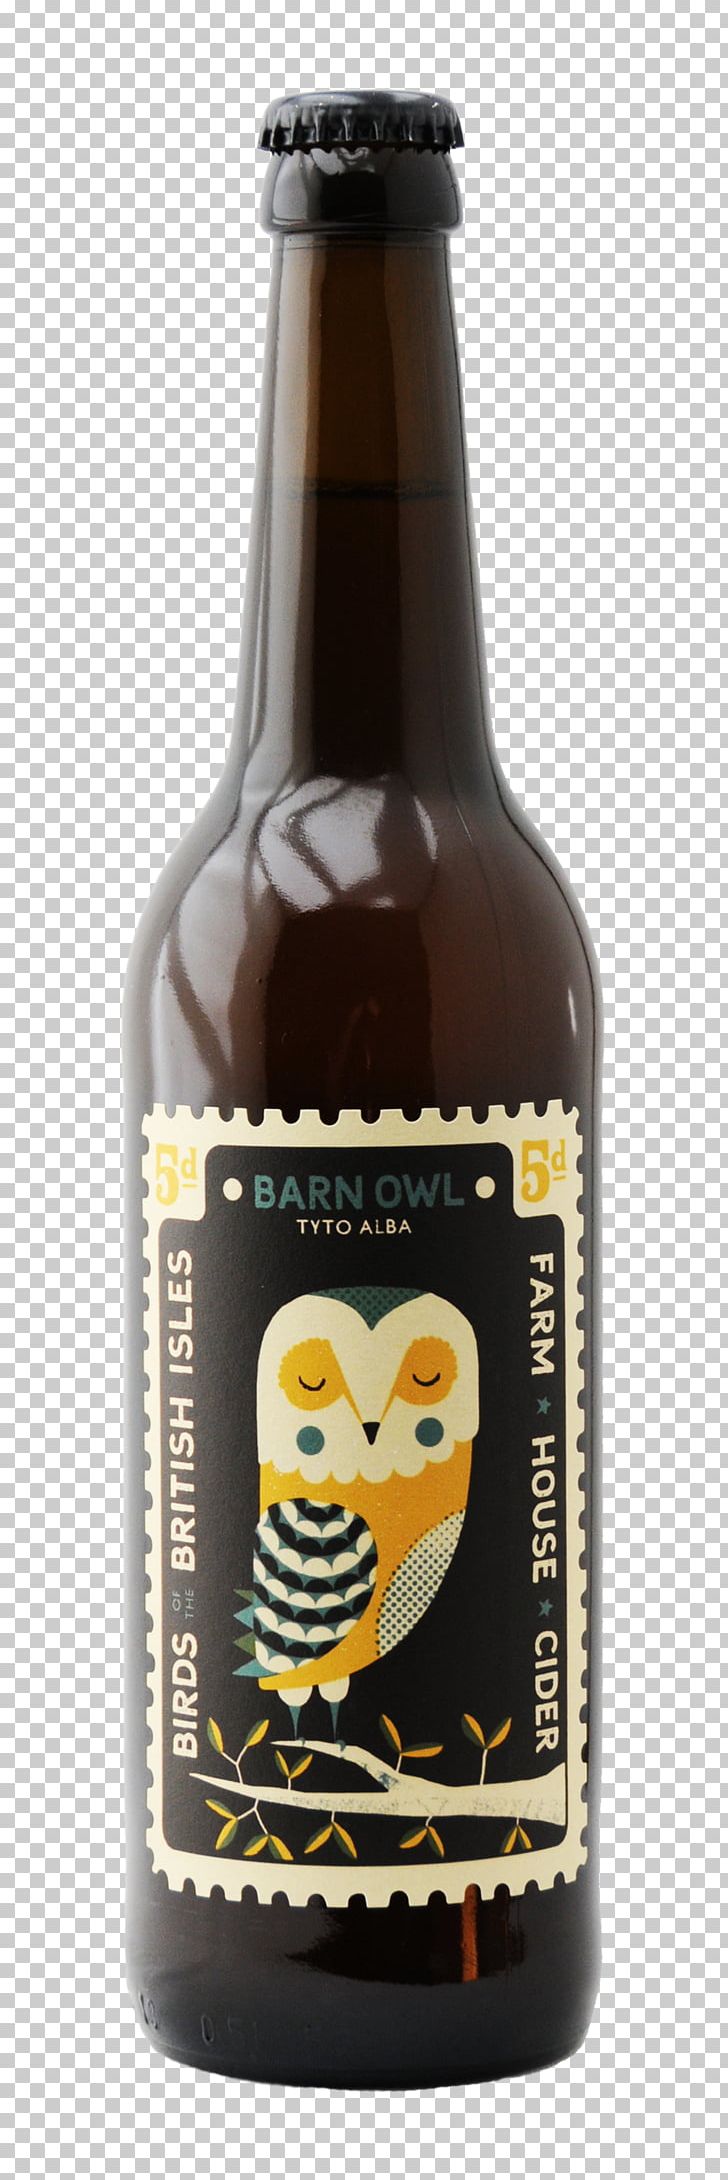 Beer Bottle Ale Cider Perry Wine PNG, Clipart, Ale, Apple, Beer, Beer Bottle, Bottle Free PNG Download